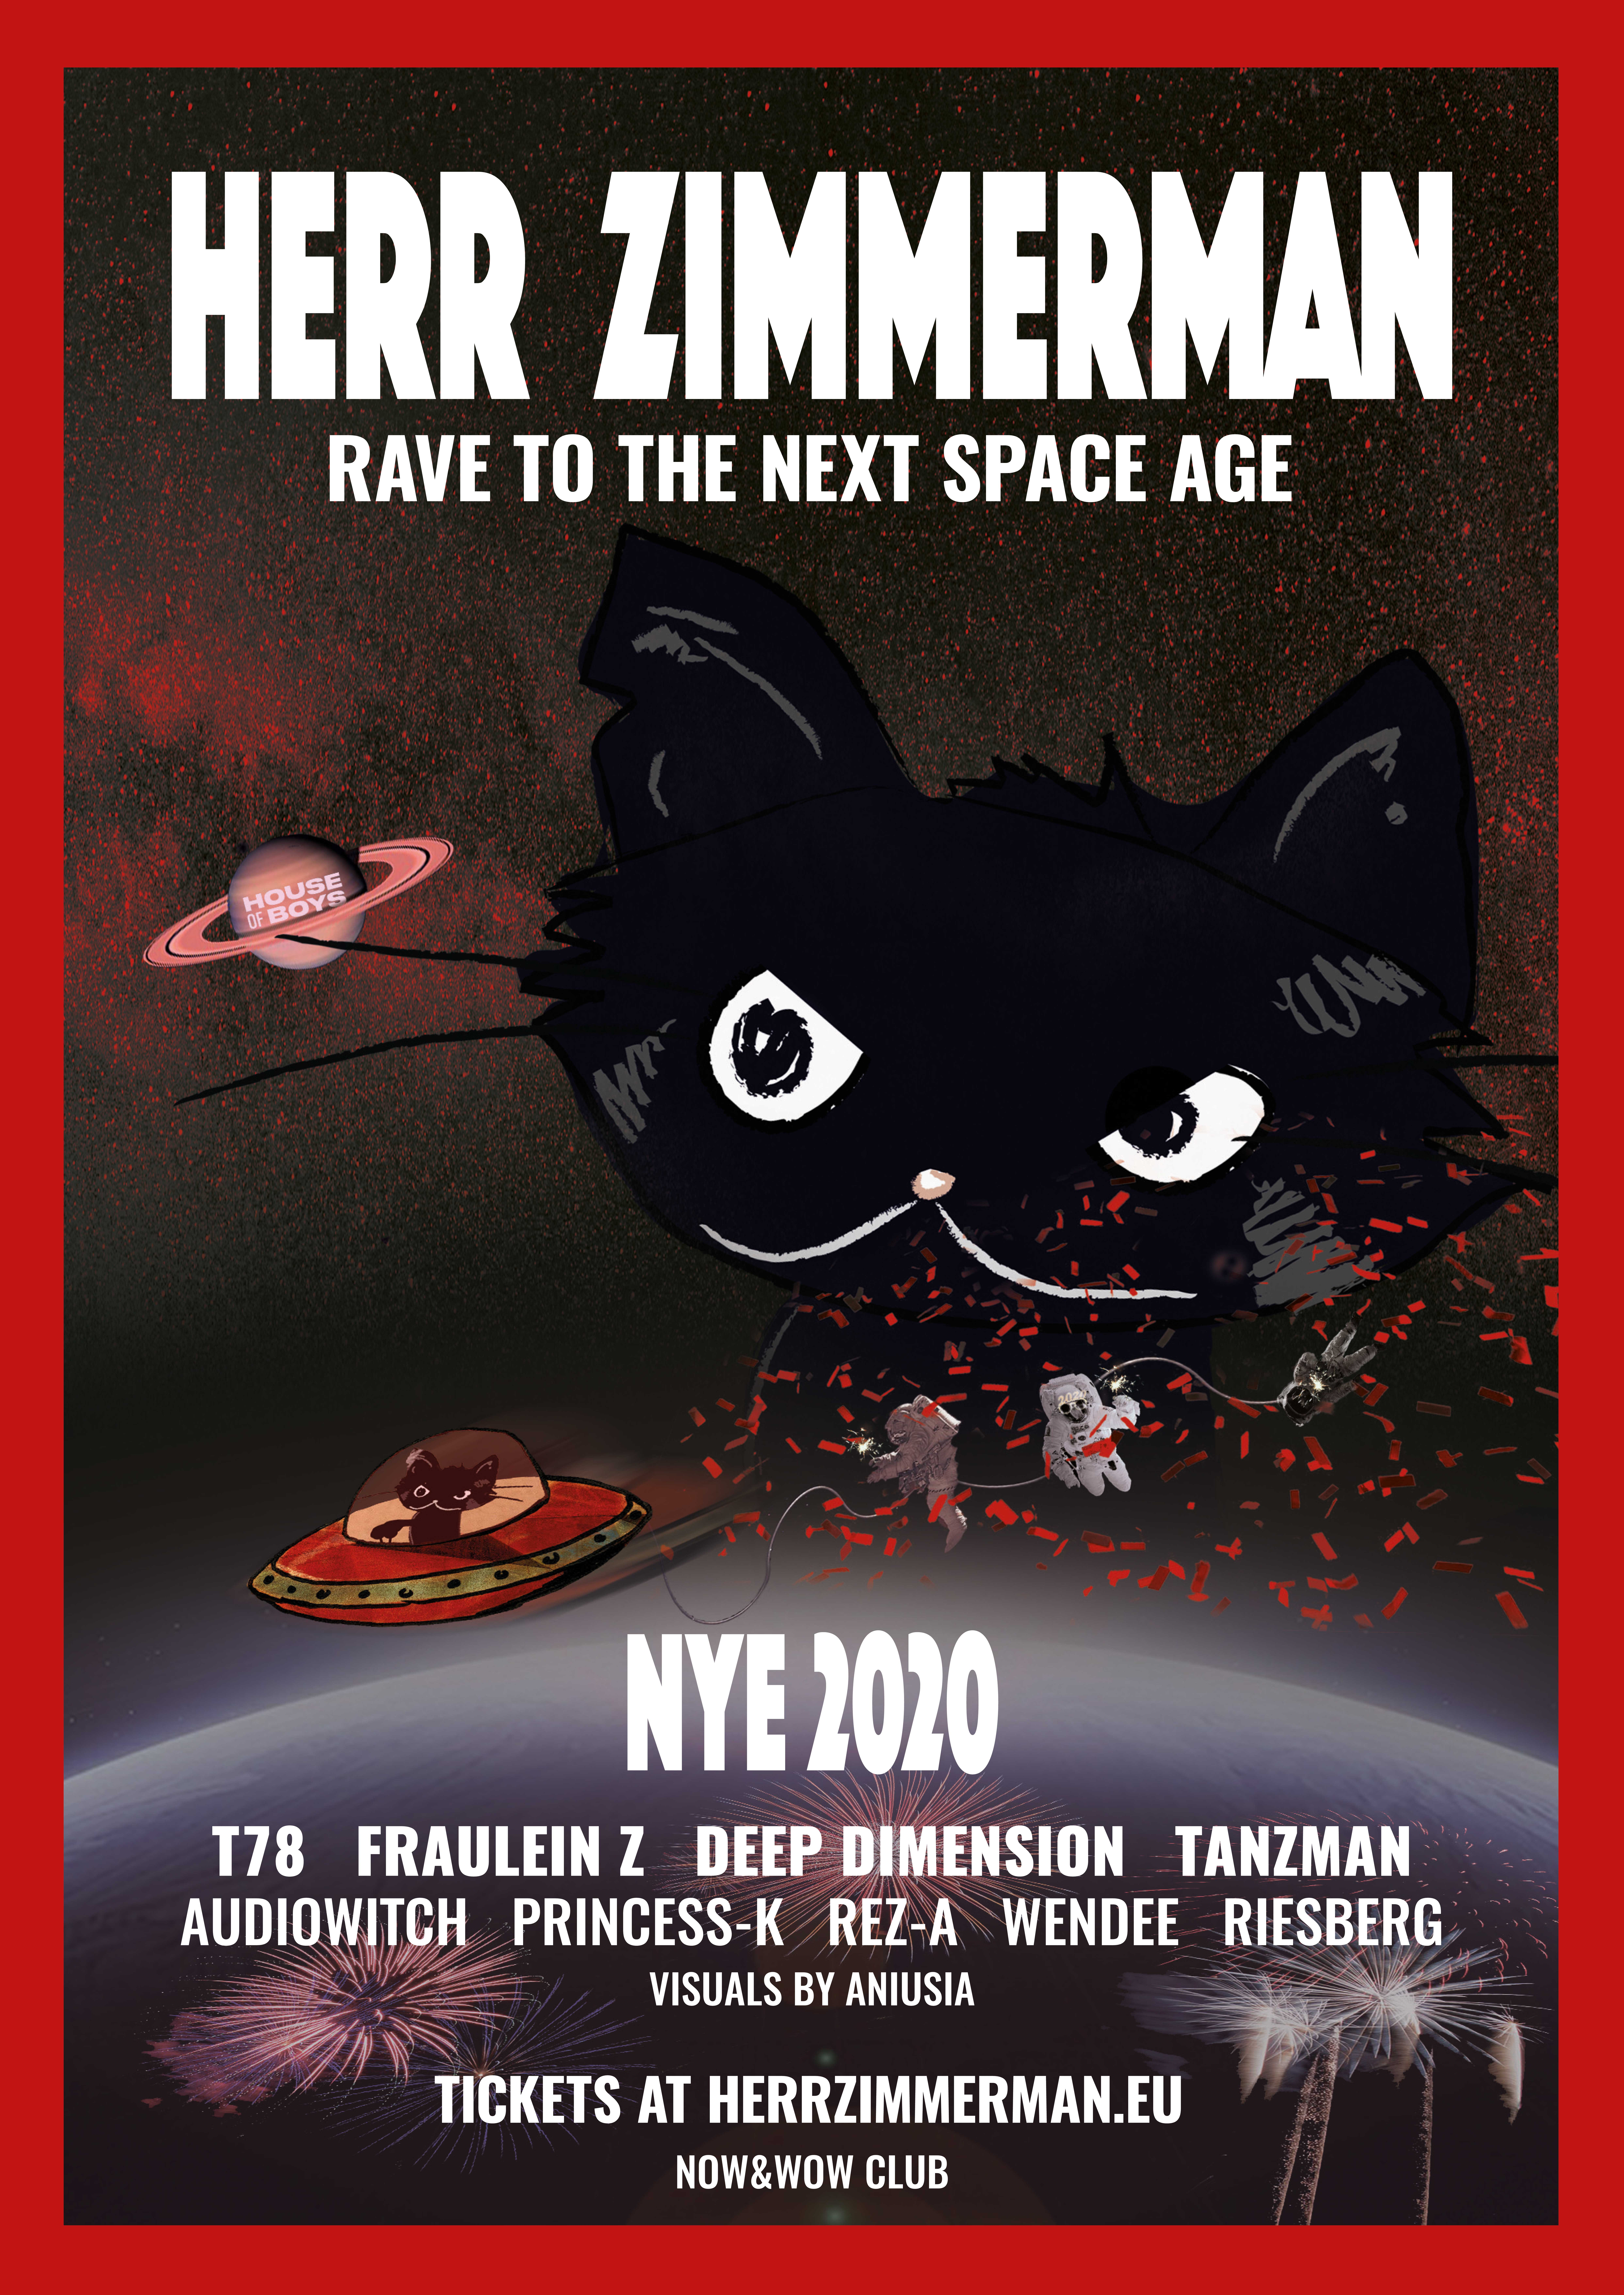 HERR ZIMMERMAN'S NYE PARTY - RAVE TO THE NEXT SPACE AGE!